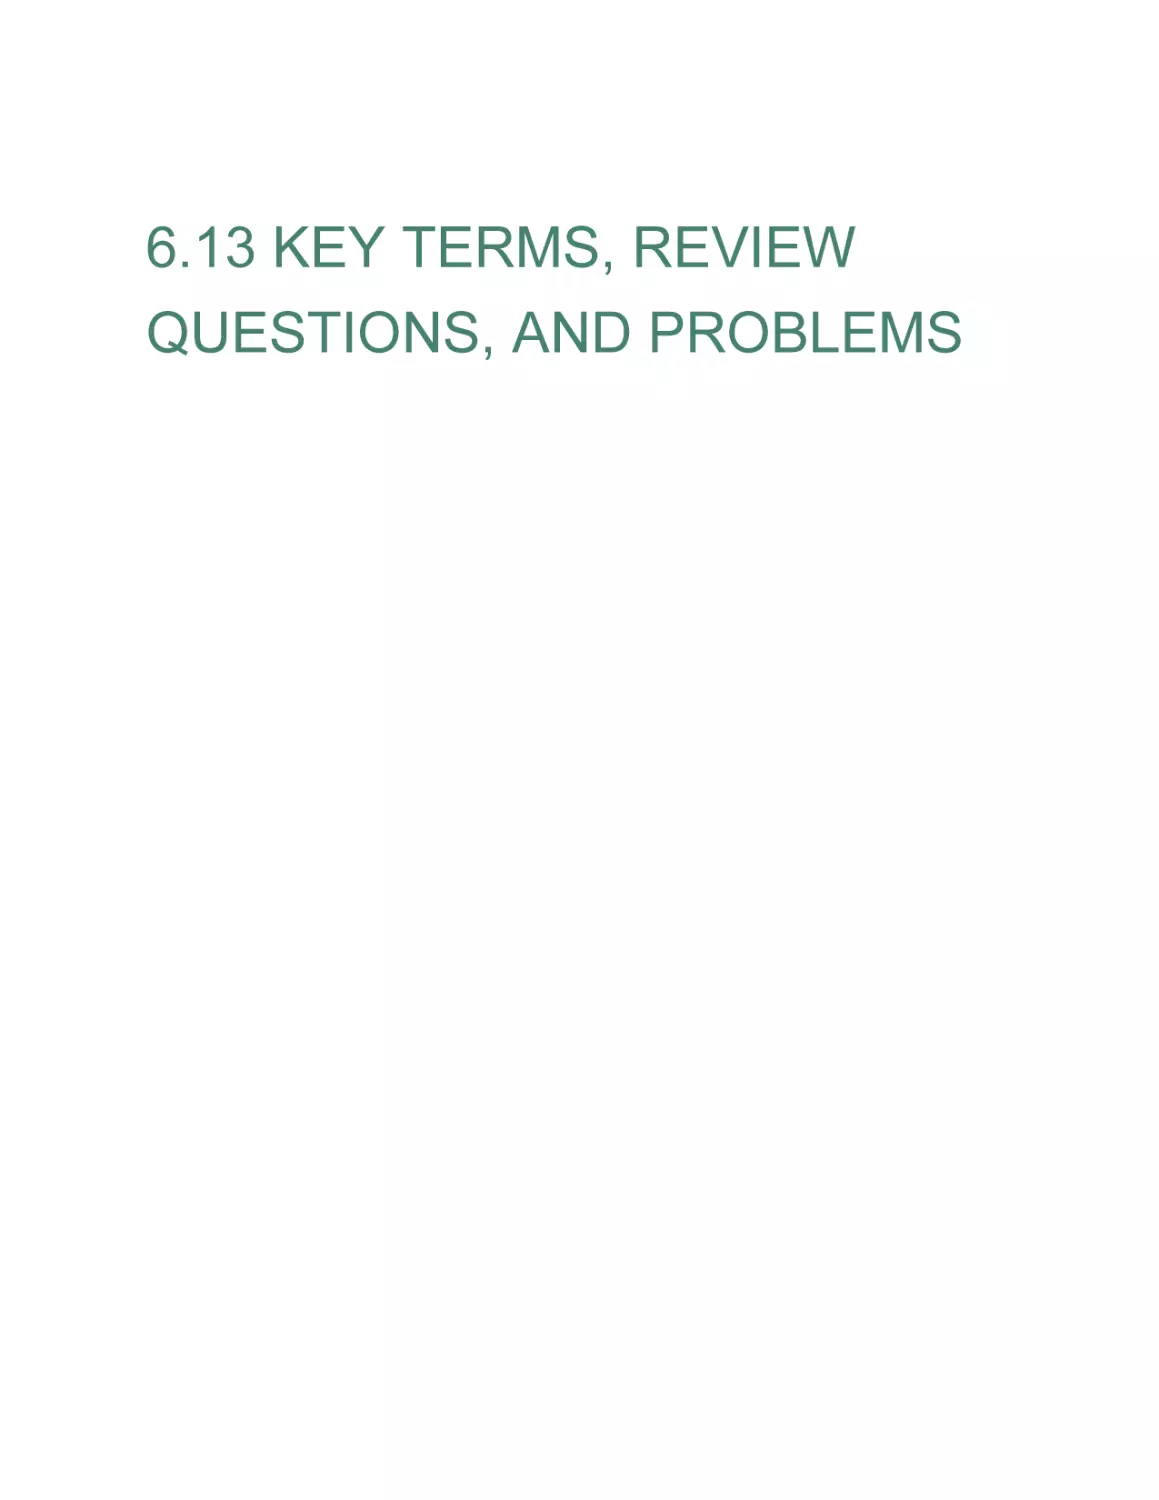 6.13 KEY TERMS, REVIEW QUESTIONS, AND PROBLEMS